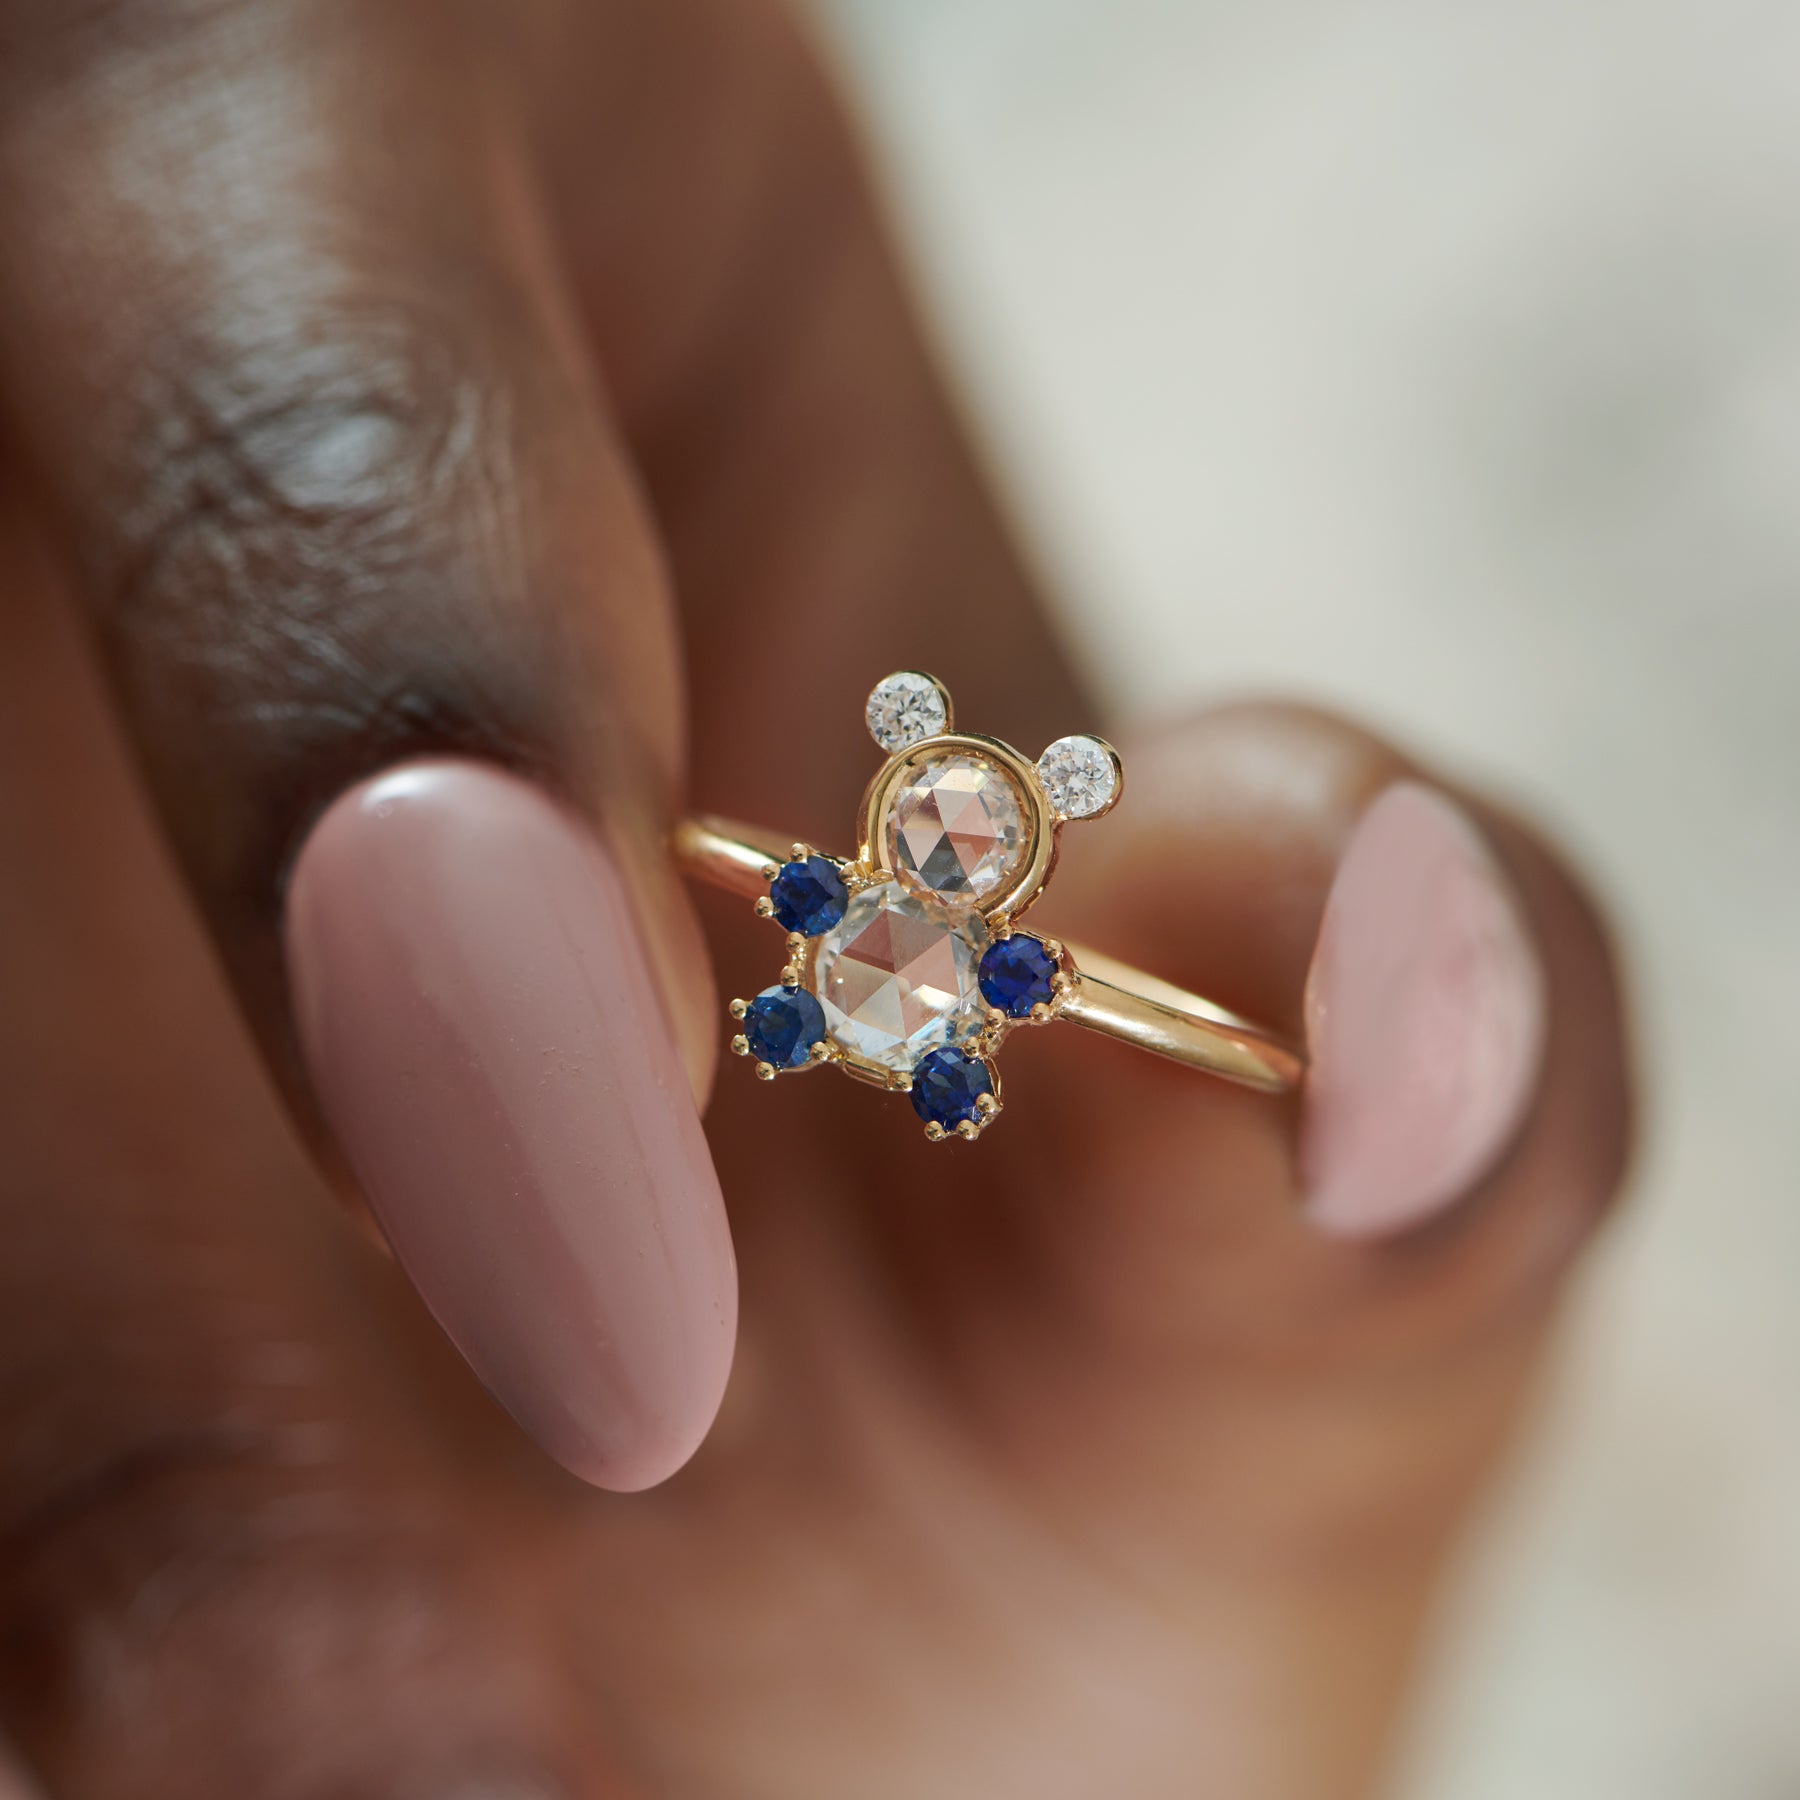 Buy 14k Solid Gold Teddy Bear Ring. Online in India - Etsy